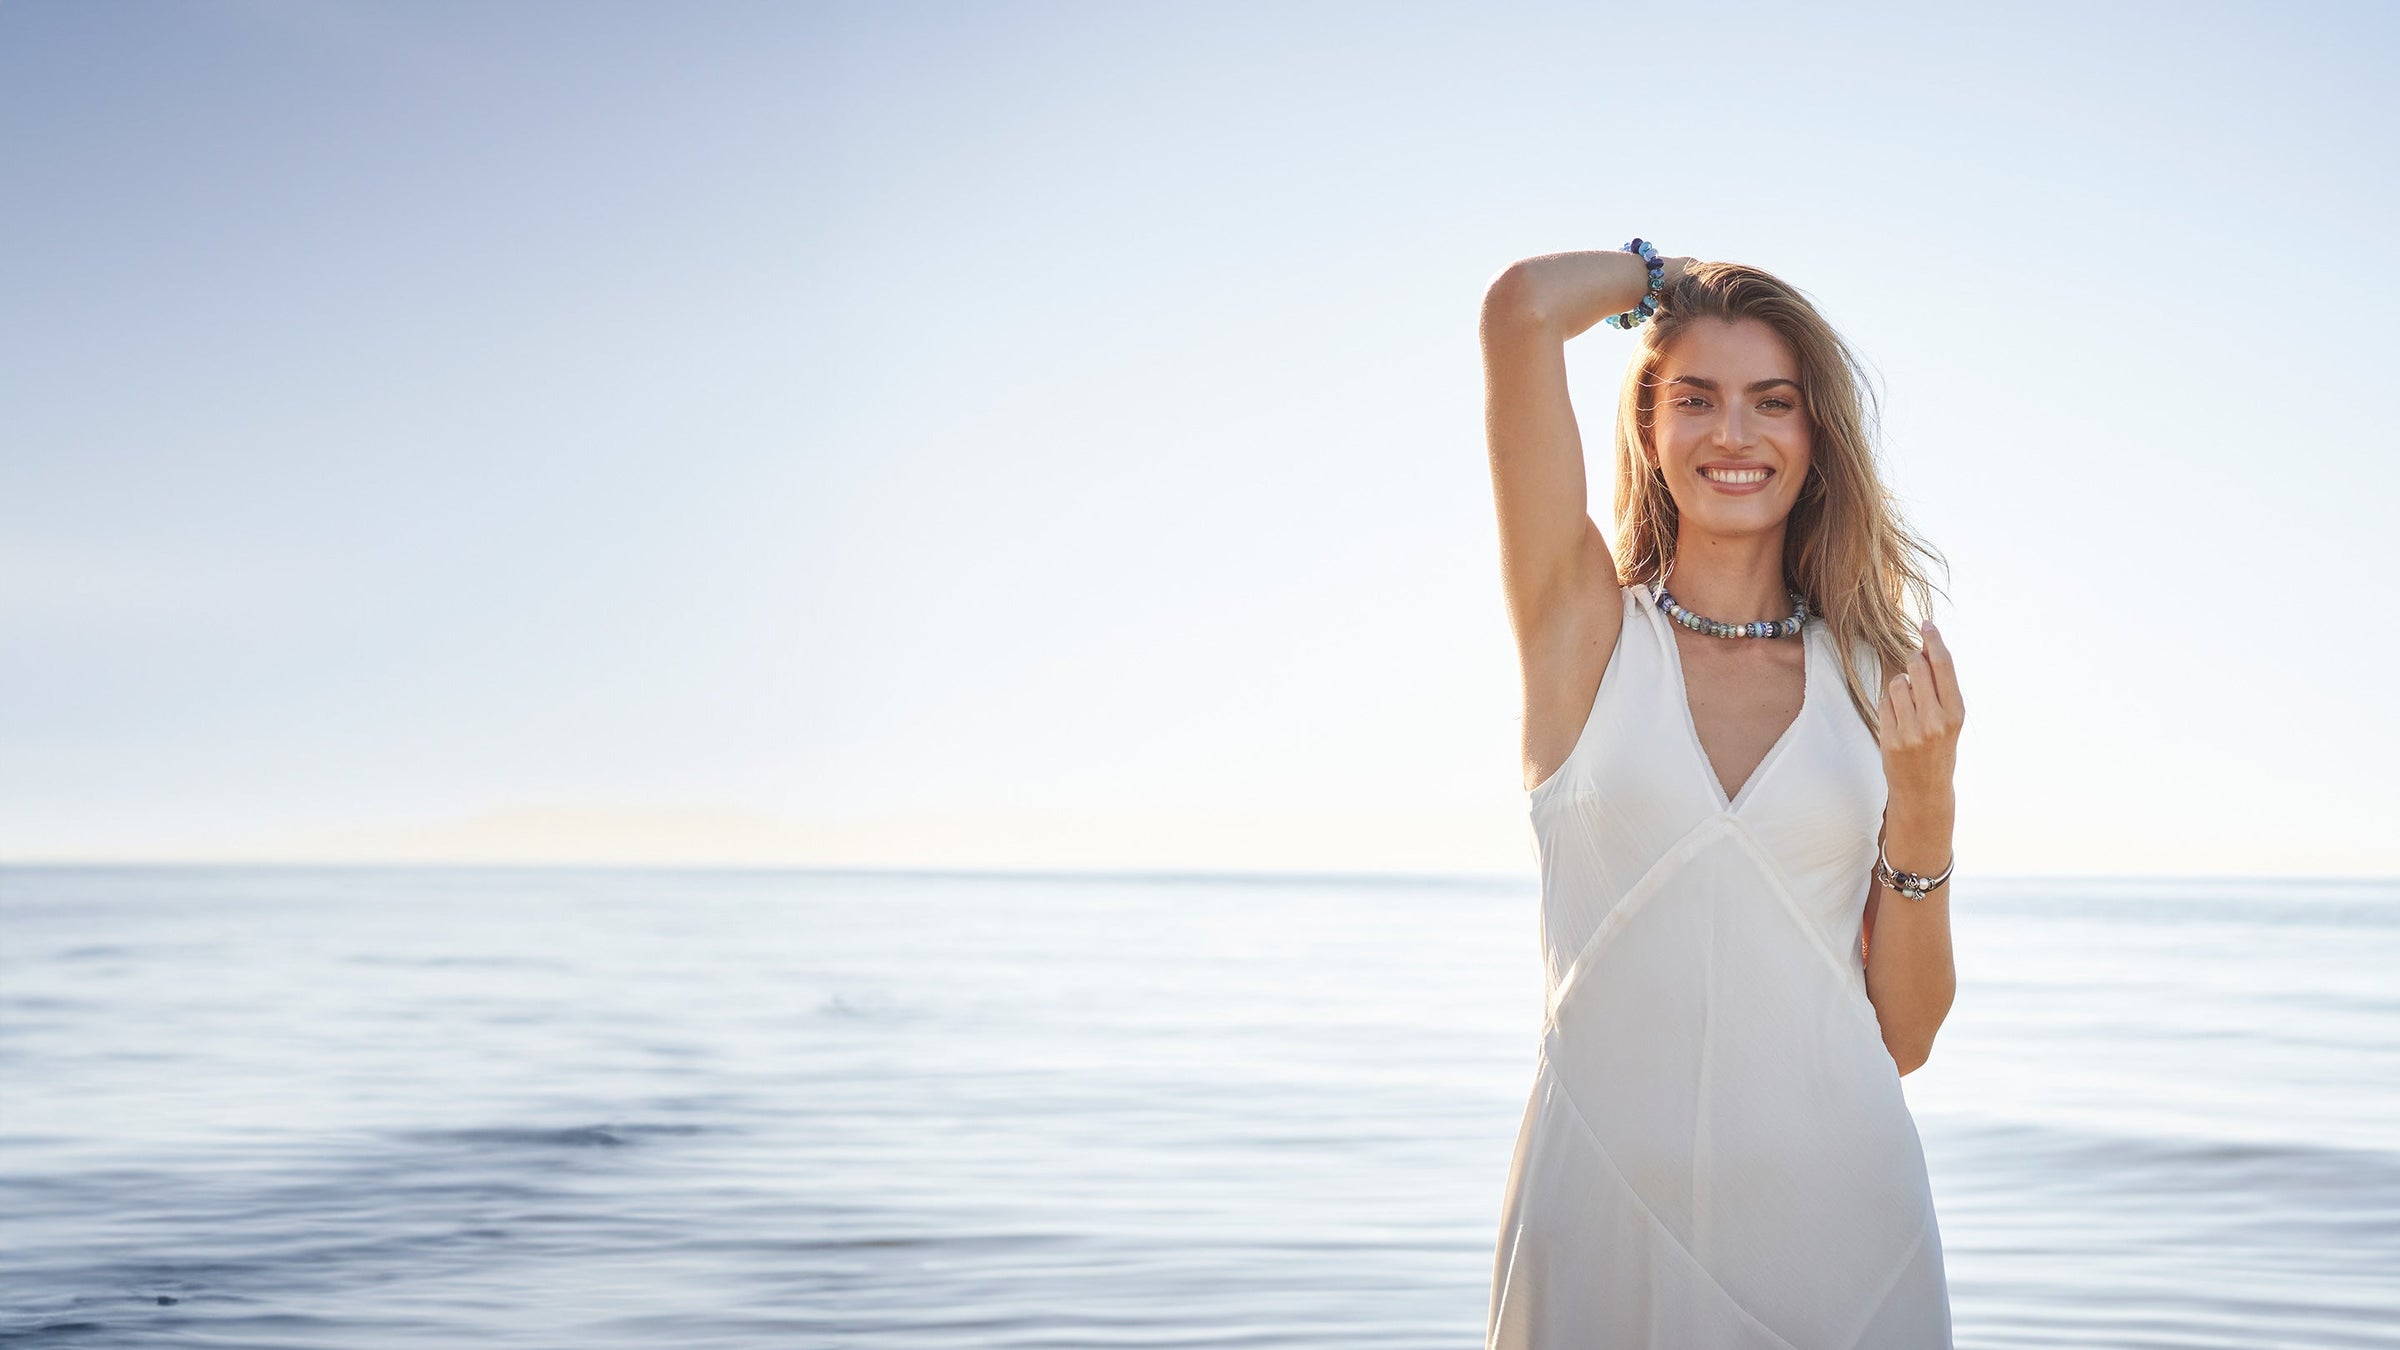 Modelwearing Trollbeads full glass bead necklace and bracelet, standing in the water at a beach smiling.